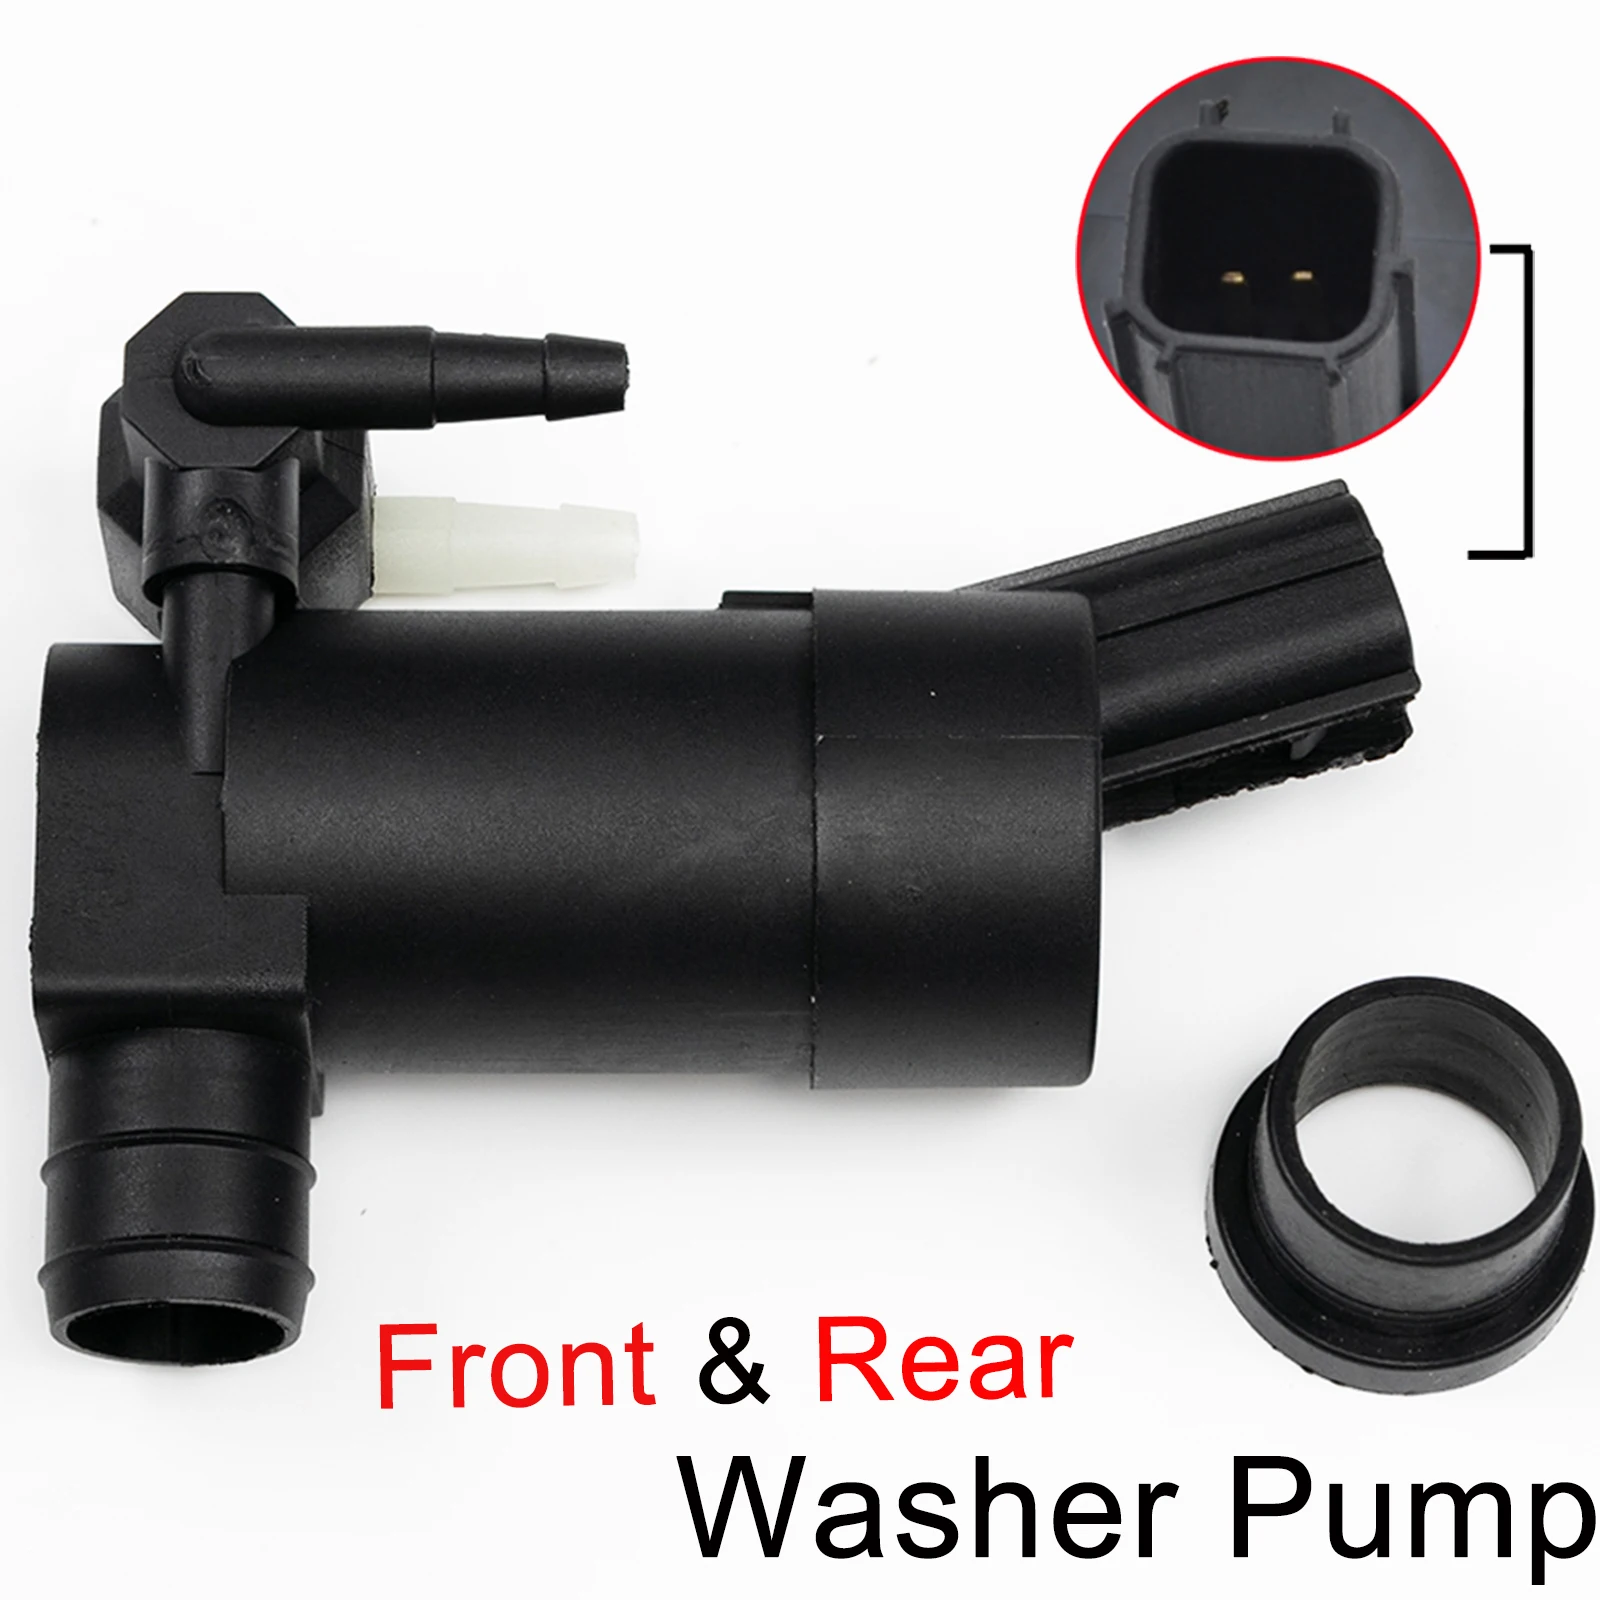 

Windshield Wiper Washer Pump Twin Outlet Water Motor For Ford Focus Kuga Galaxy S-Max For Volvo XC90 V70 C30 V50 Front Rear